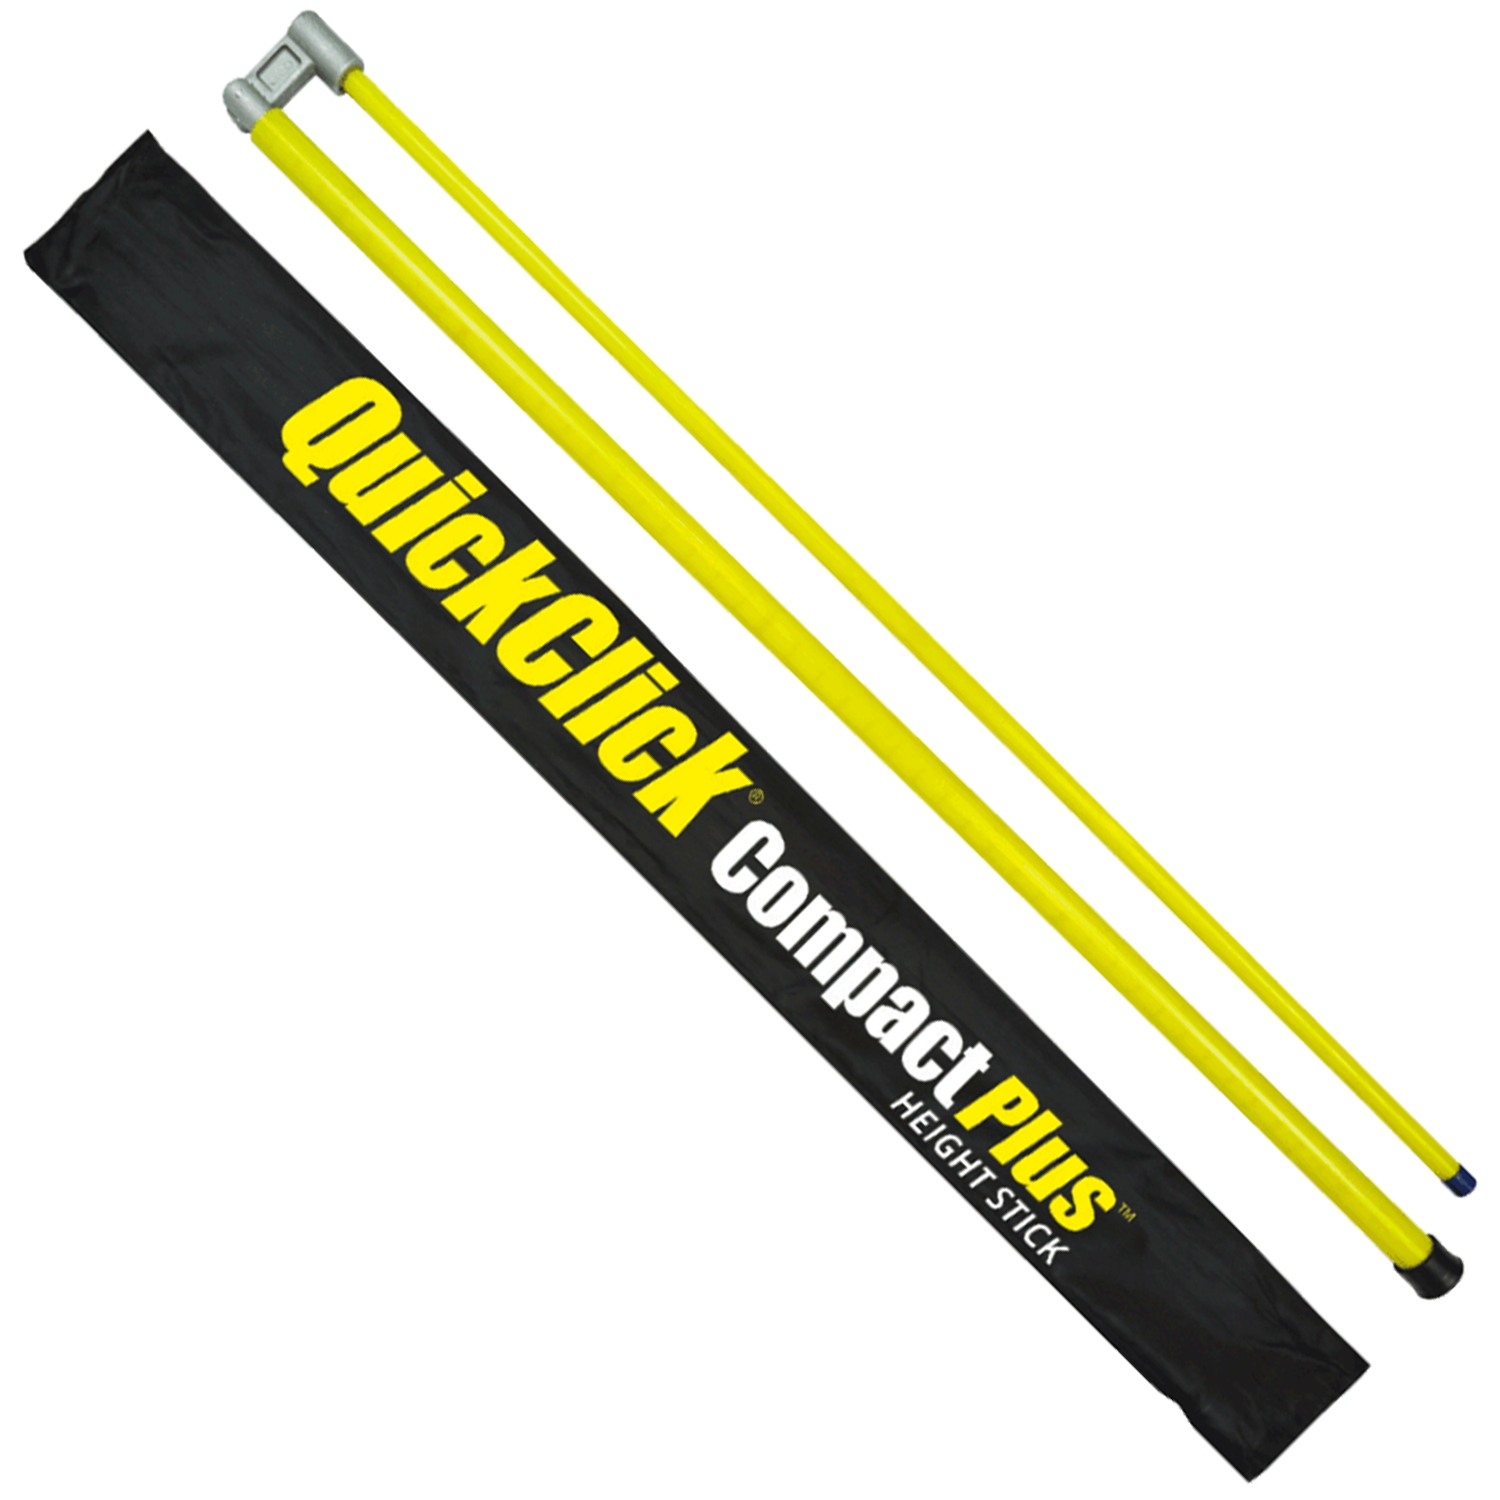 Up To 15' QuickClick Compact Plus Load Height Measuring Stick 